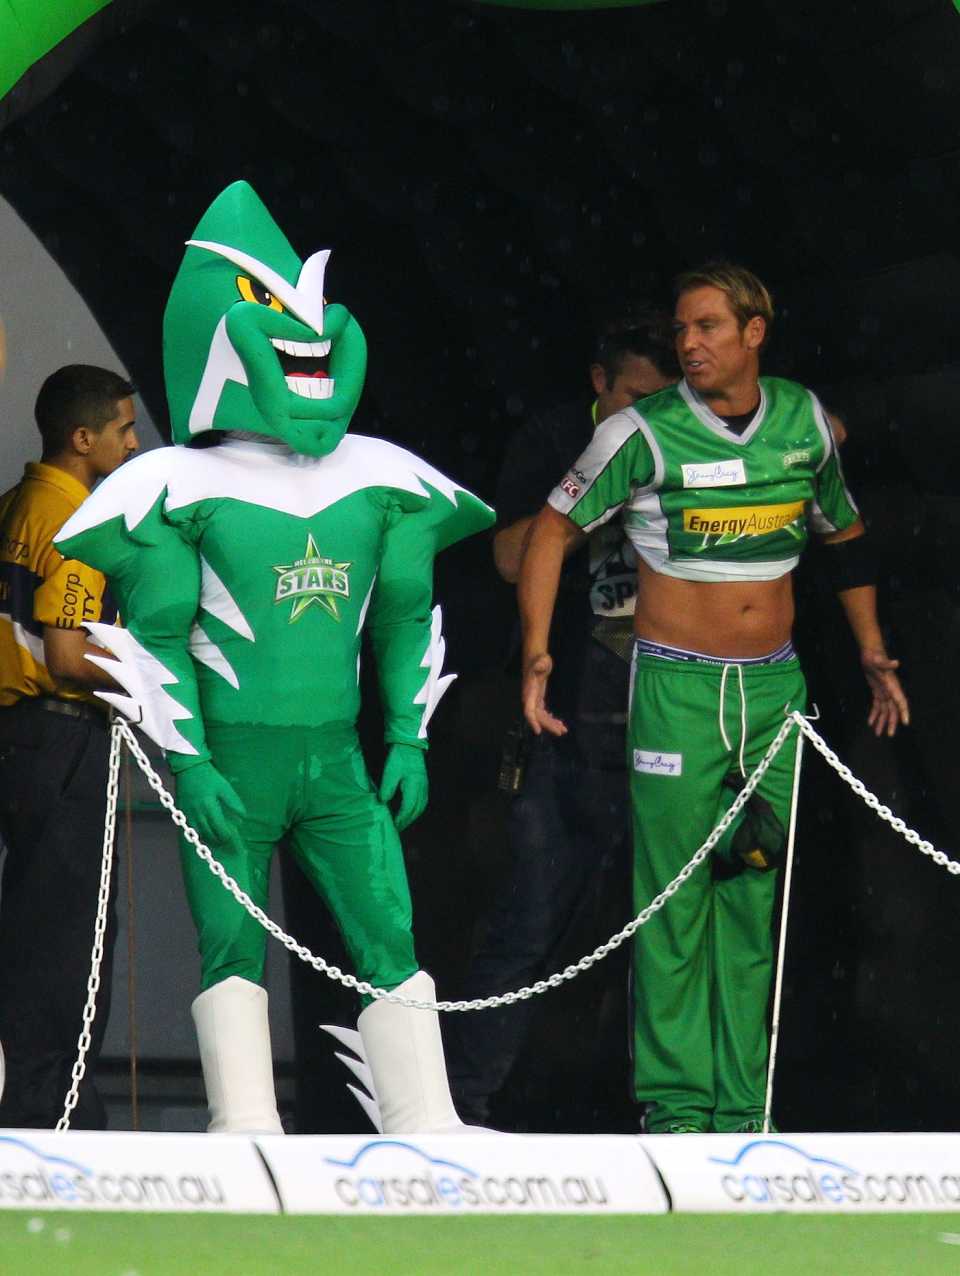 Shane Warne is miked up for television next to the Stars mascot